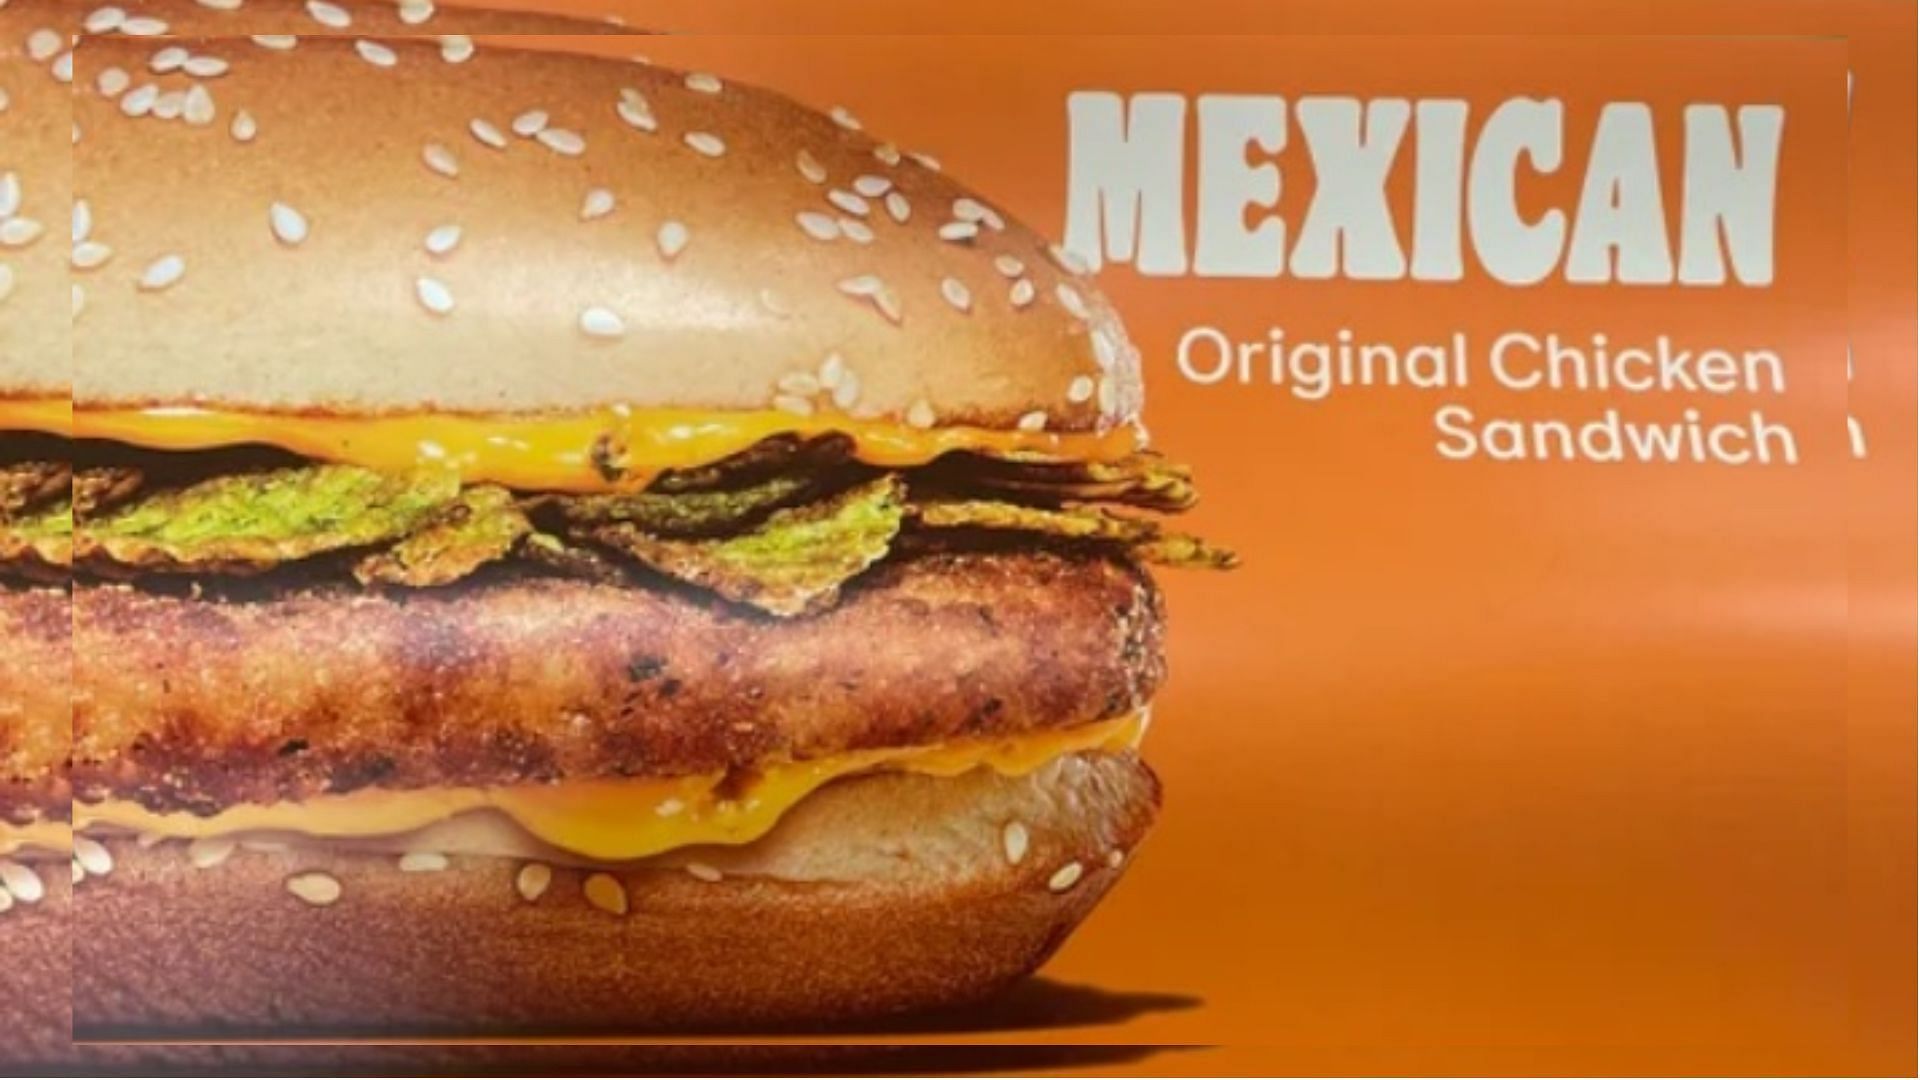 The upcoming Mexican Original Chicken Sandwich is expected to be available starting in early January (Image via Burger King)